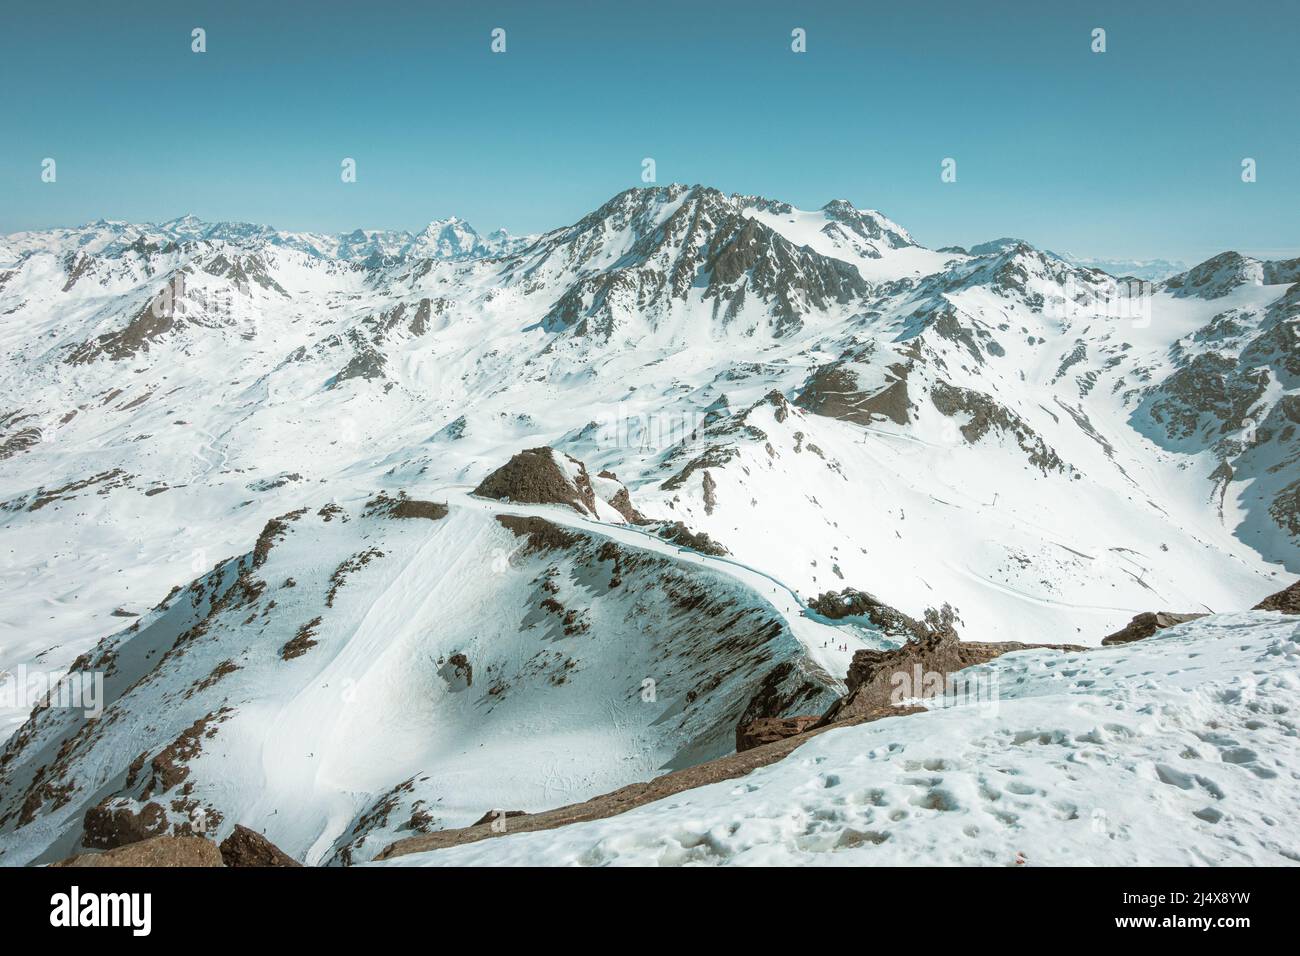 Top of French alps in the distance, range of mountains under snow, ski slopes in Val Thorens, France Stock Photo